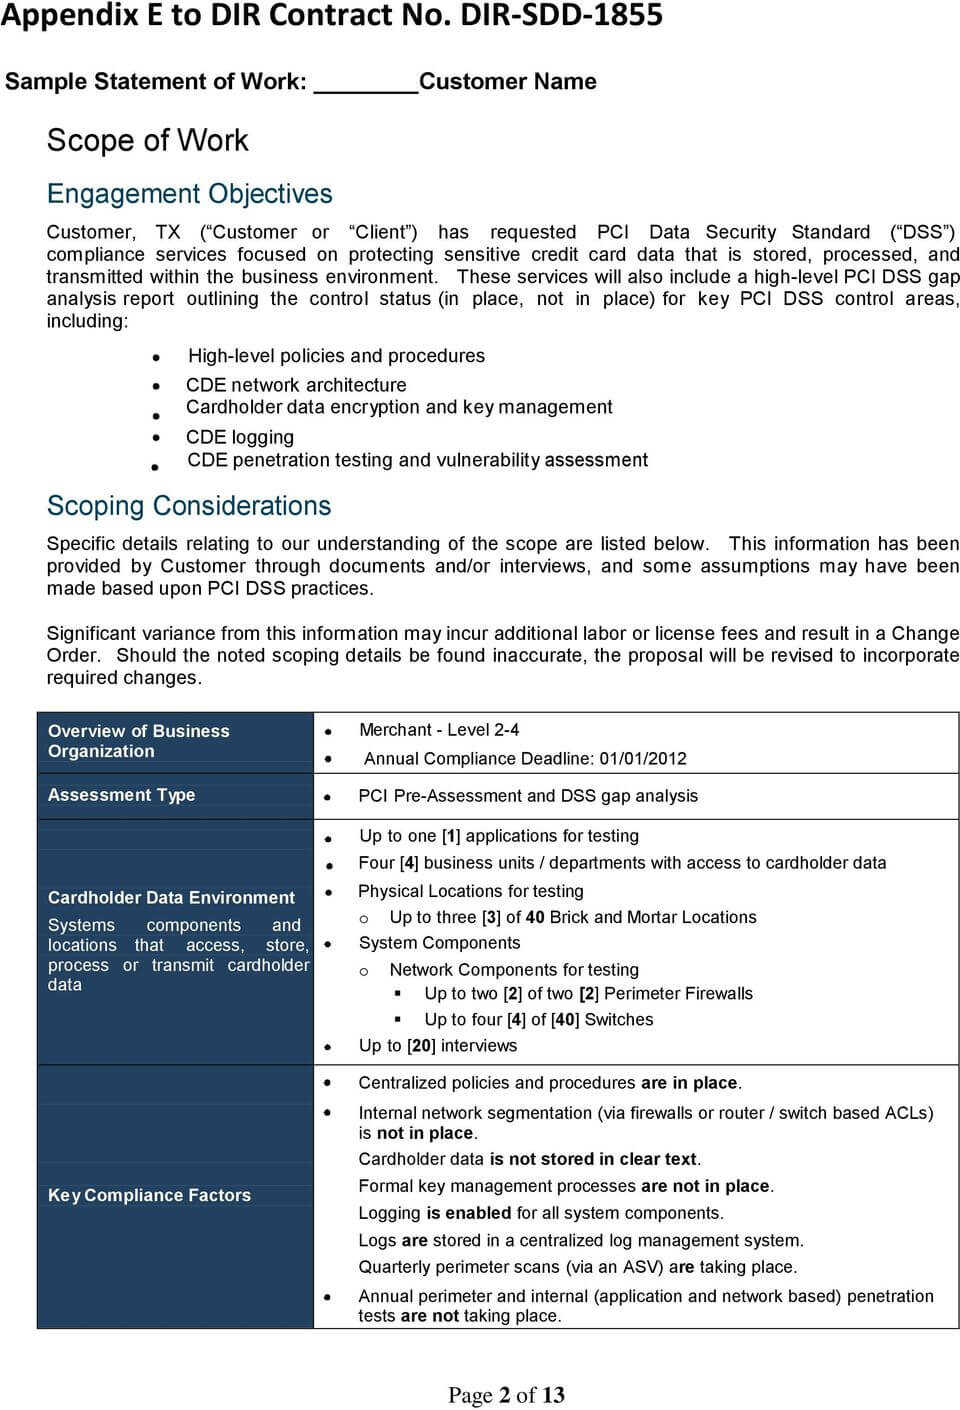 Sample Statement Of Work - Pdf Free Download With Regard To Pci Dss Gap Analysis Report Template